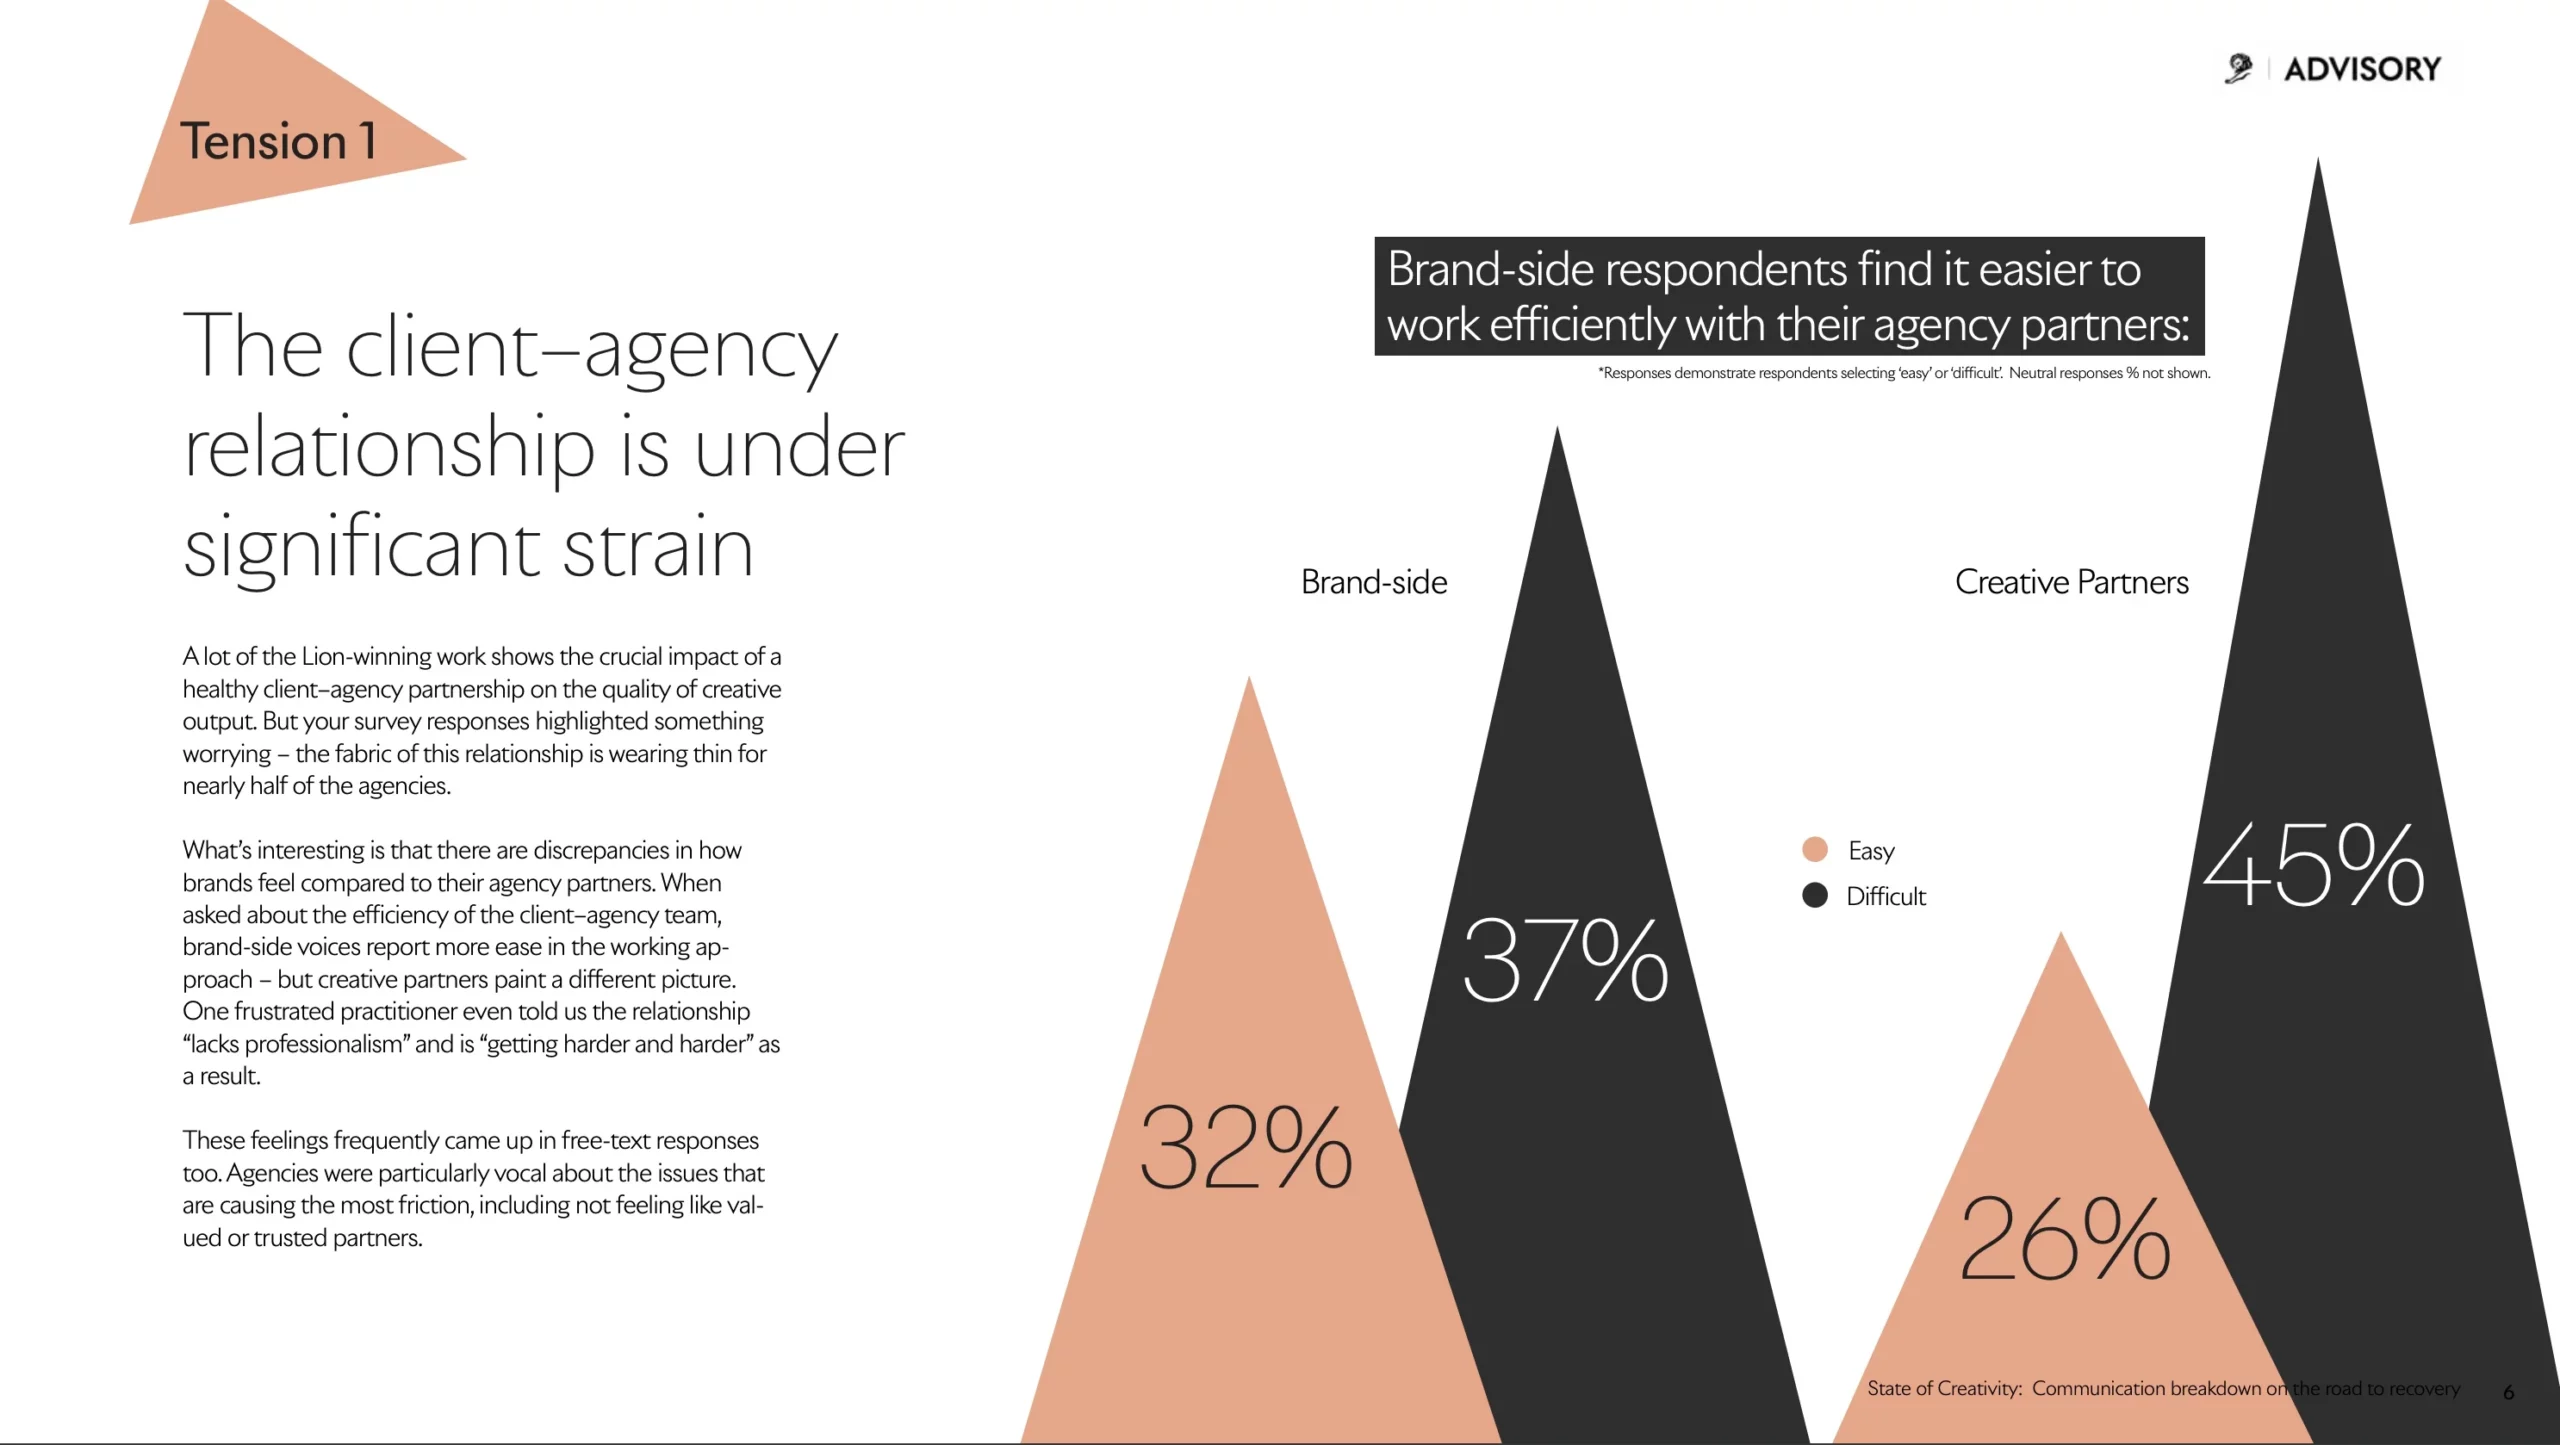 A professional infographic showing tension in client-agency relationships with comparative data on brand-side and creative partners' ease of work.